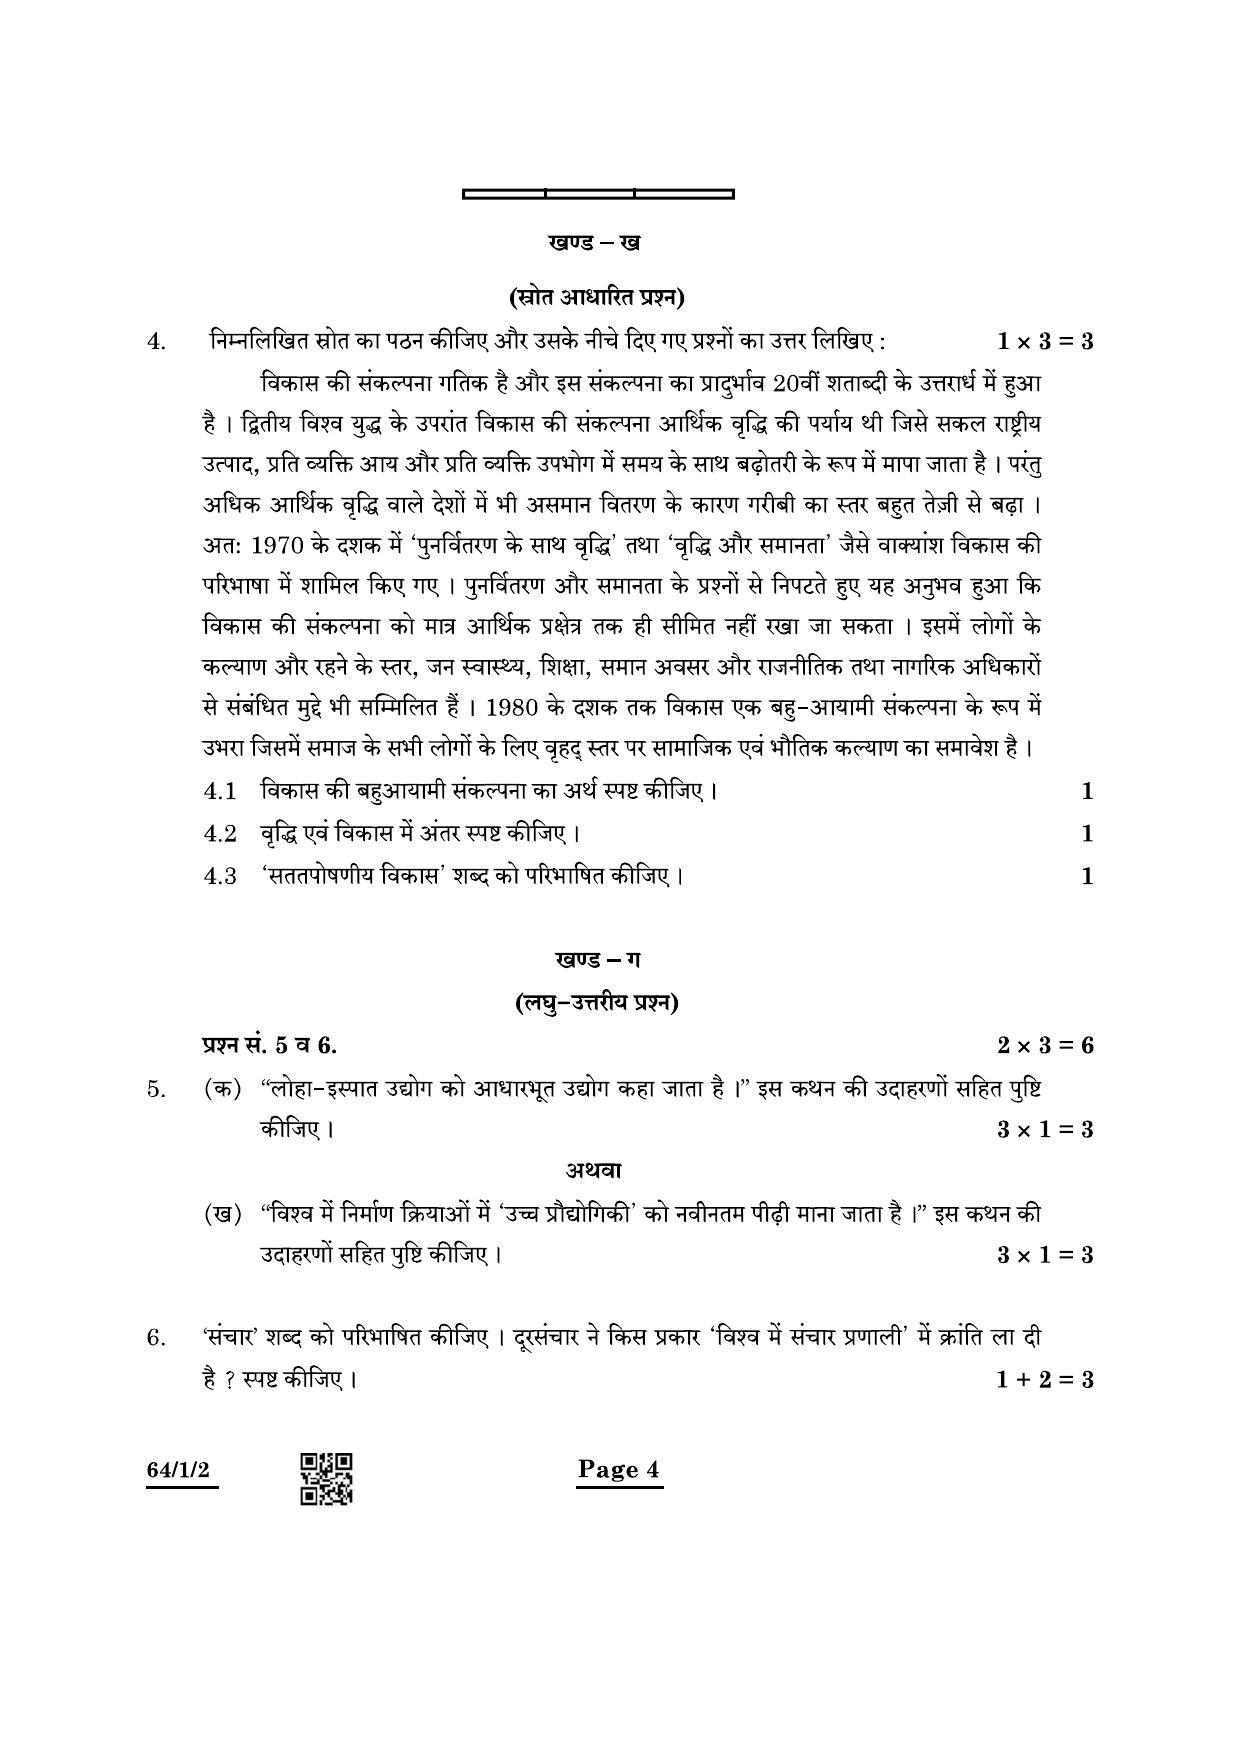 CBSE Class 12 64-1-2 Geography 2022 Question Paper - Page 4